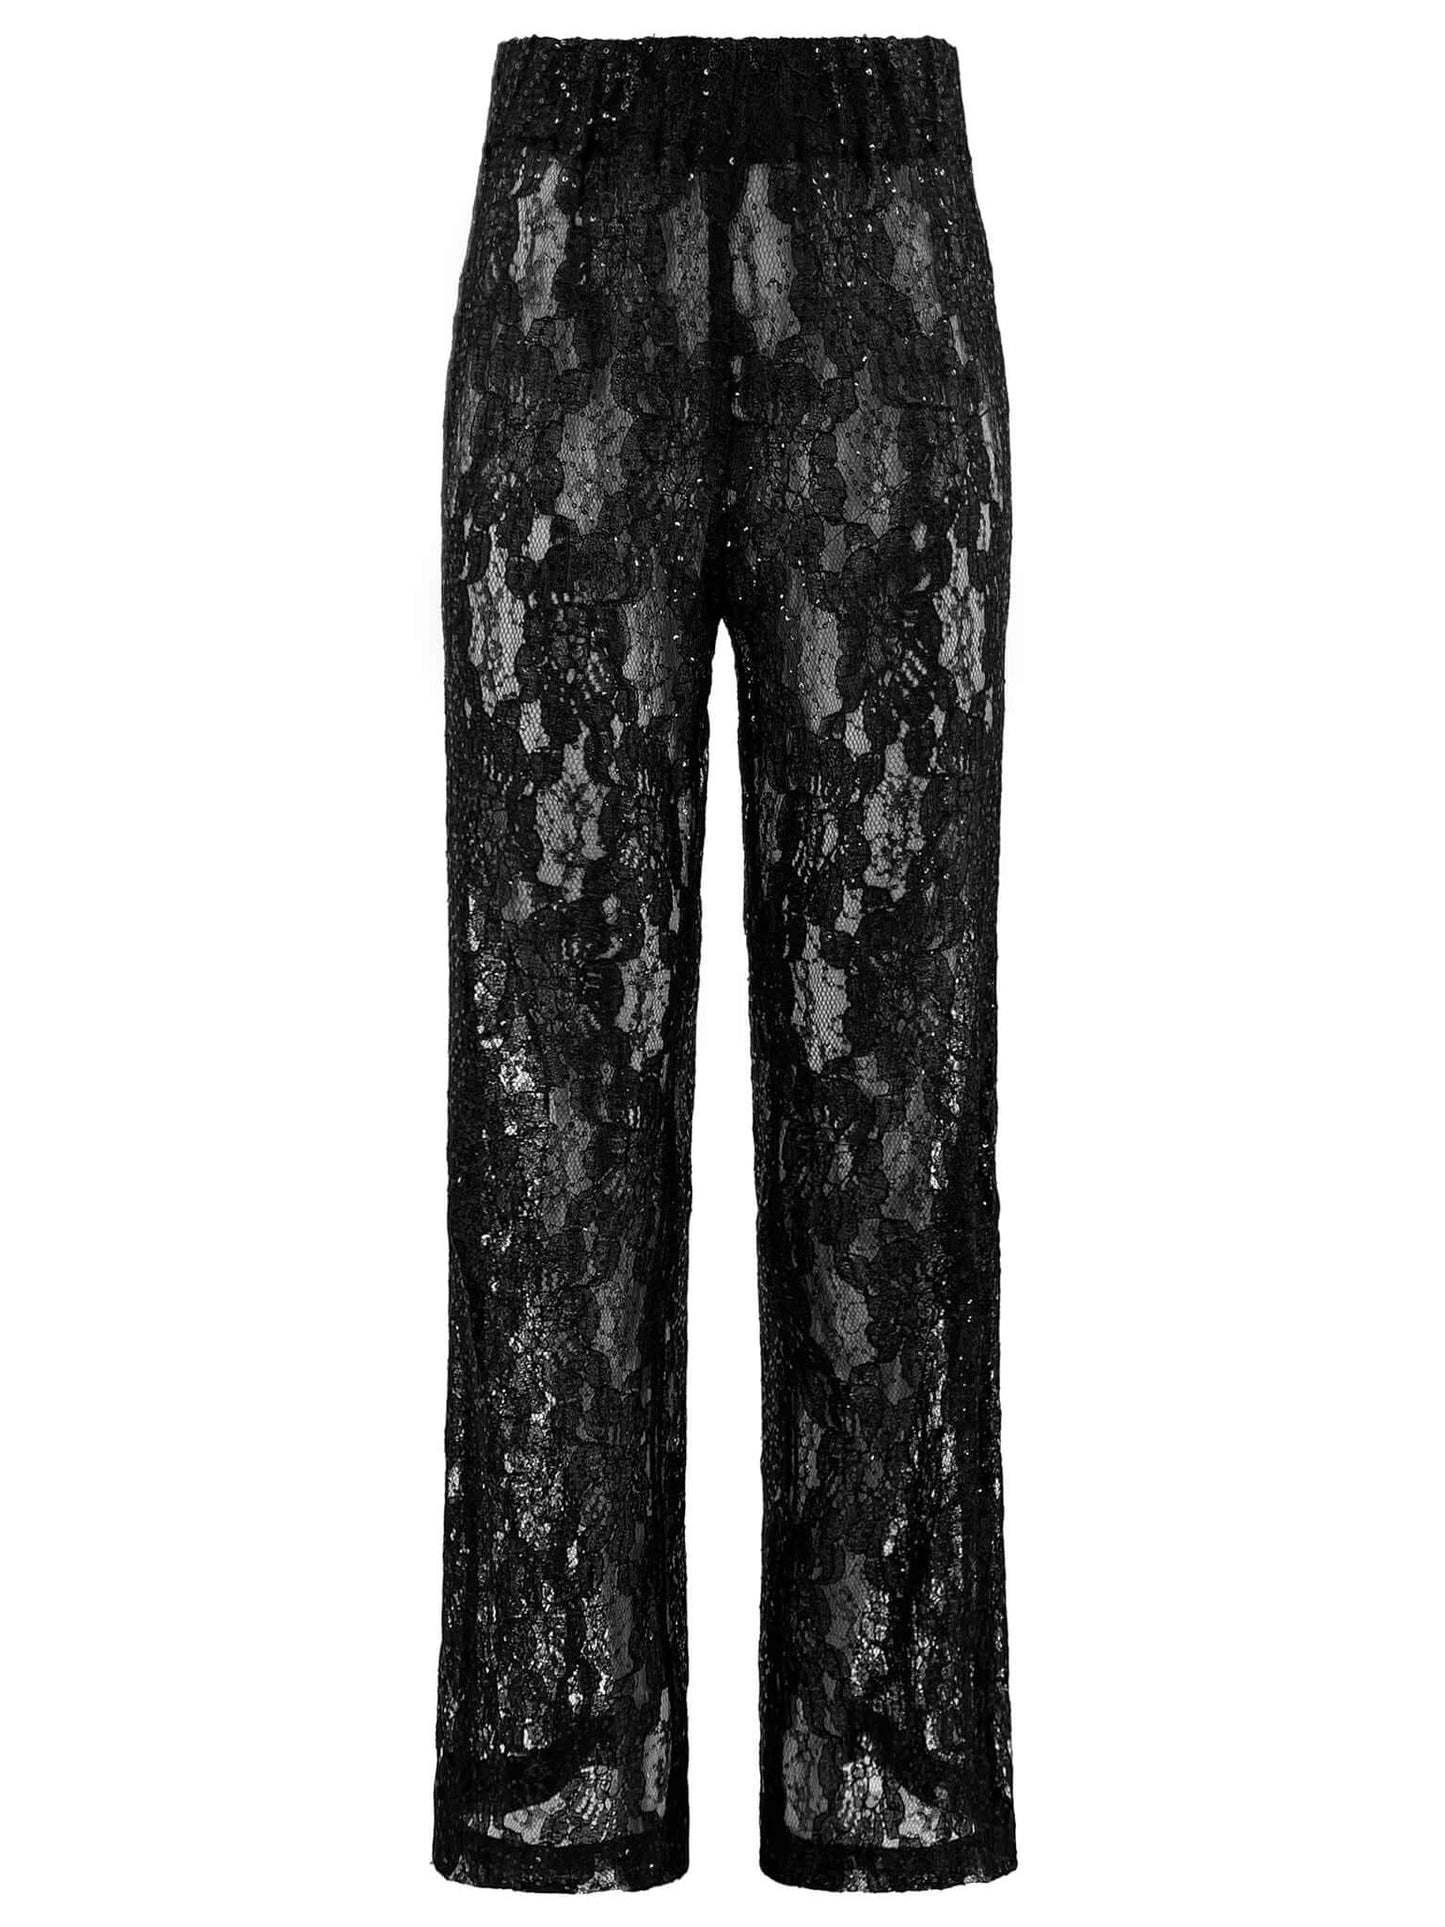 Glowing In The Dark Flared Sheer Lace Trousers Tia Dorraine